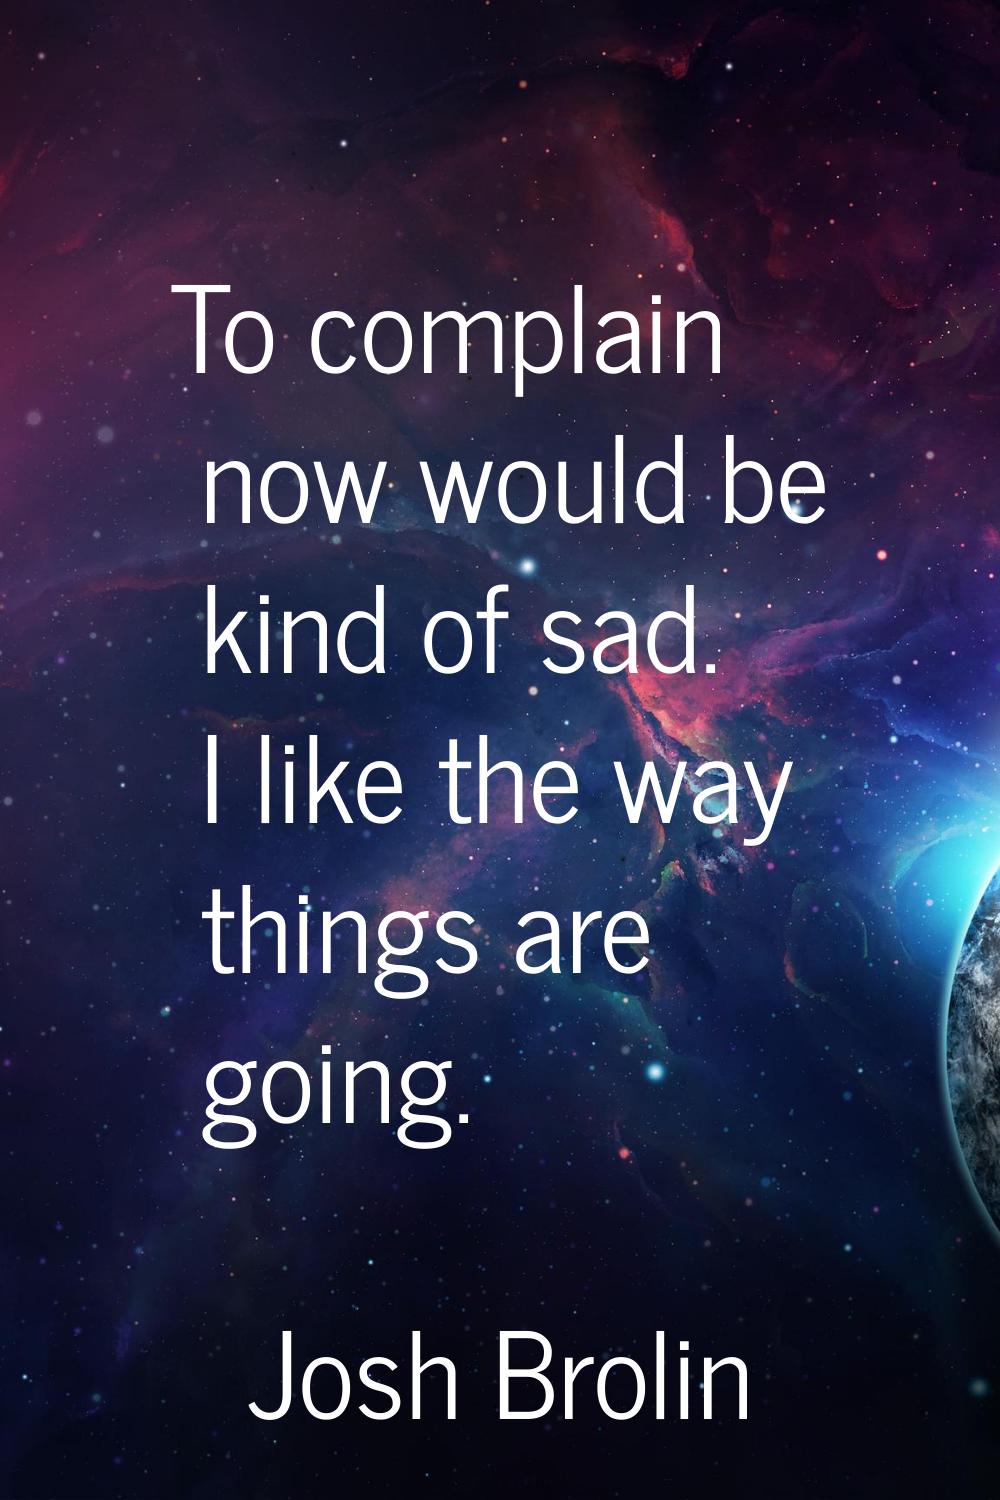 To complain now would be kind of sad. I like the way things are going.